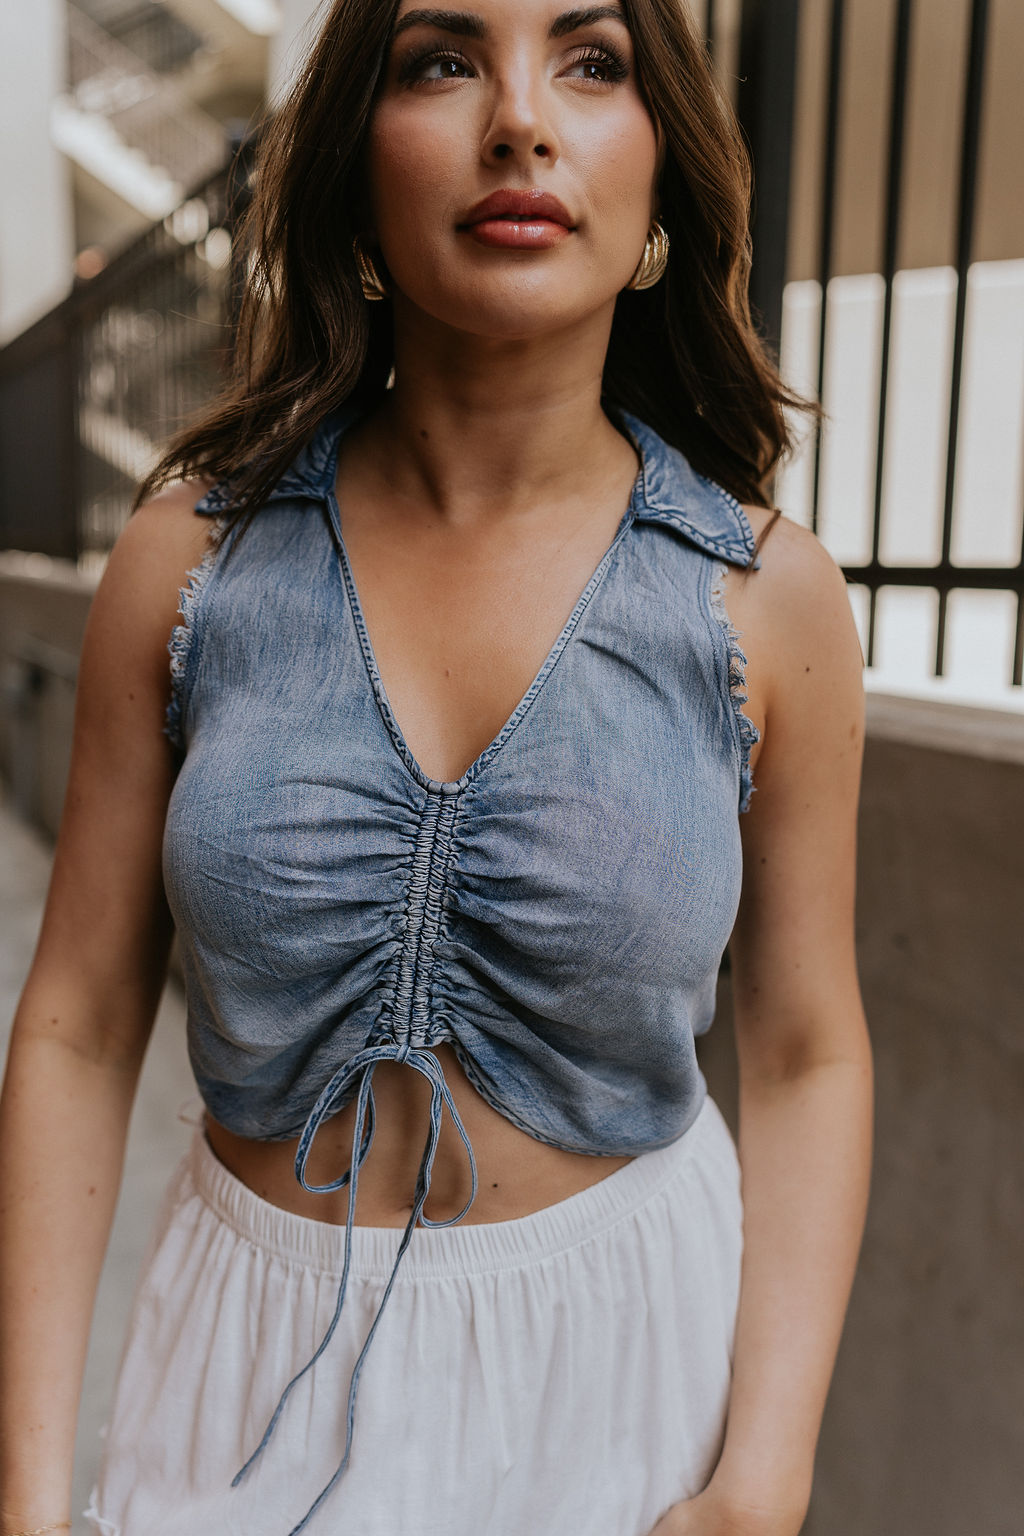 Clos eup view of female model wearing the Dallas Denim Ruched Tank Medium Denim Lightweight Fabric, Front Ruched Detail, Scoop Neckline, Collared Neckline and Sleeveless